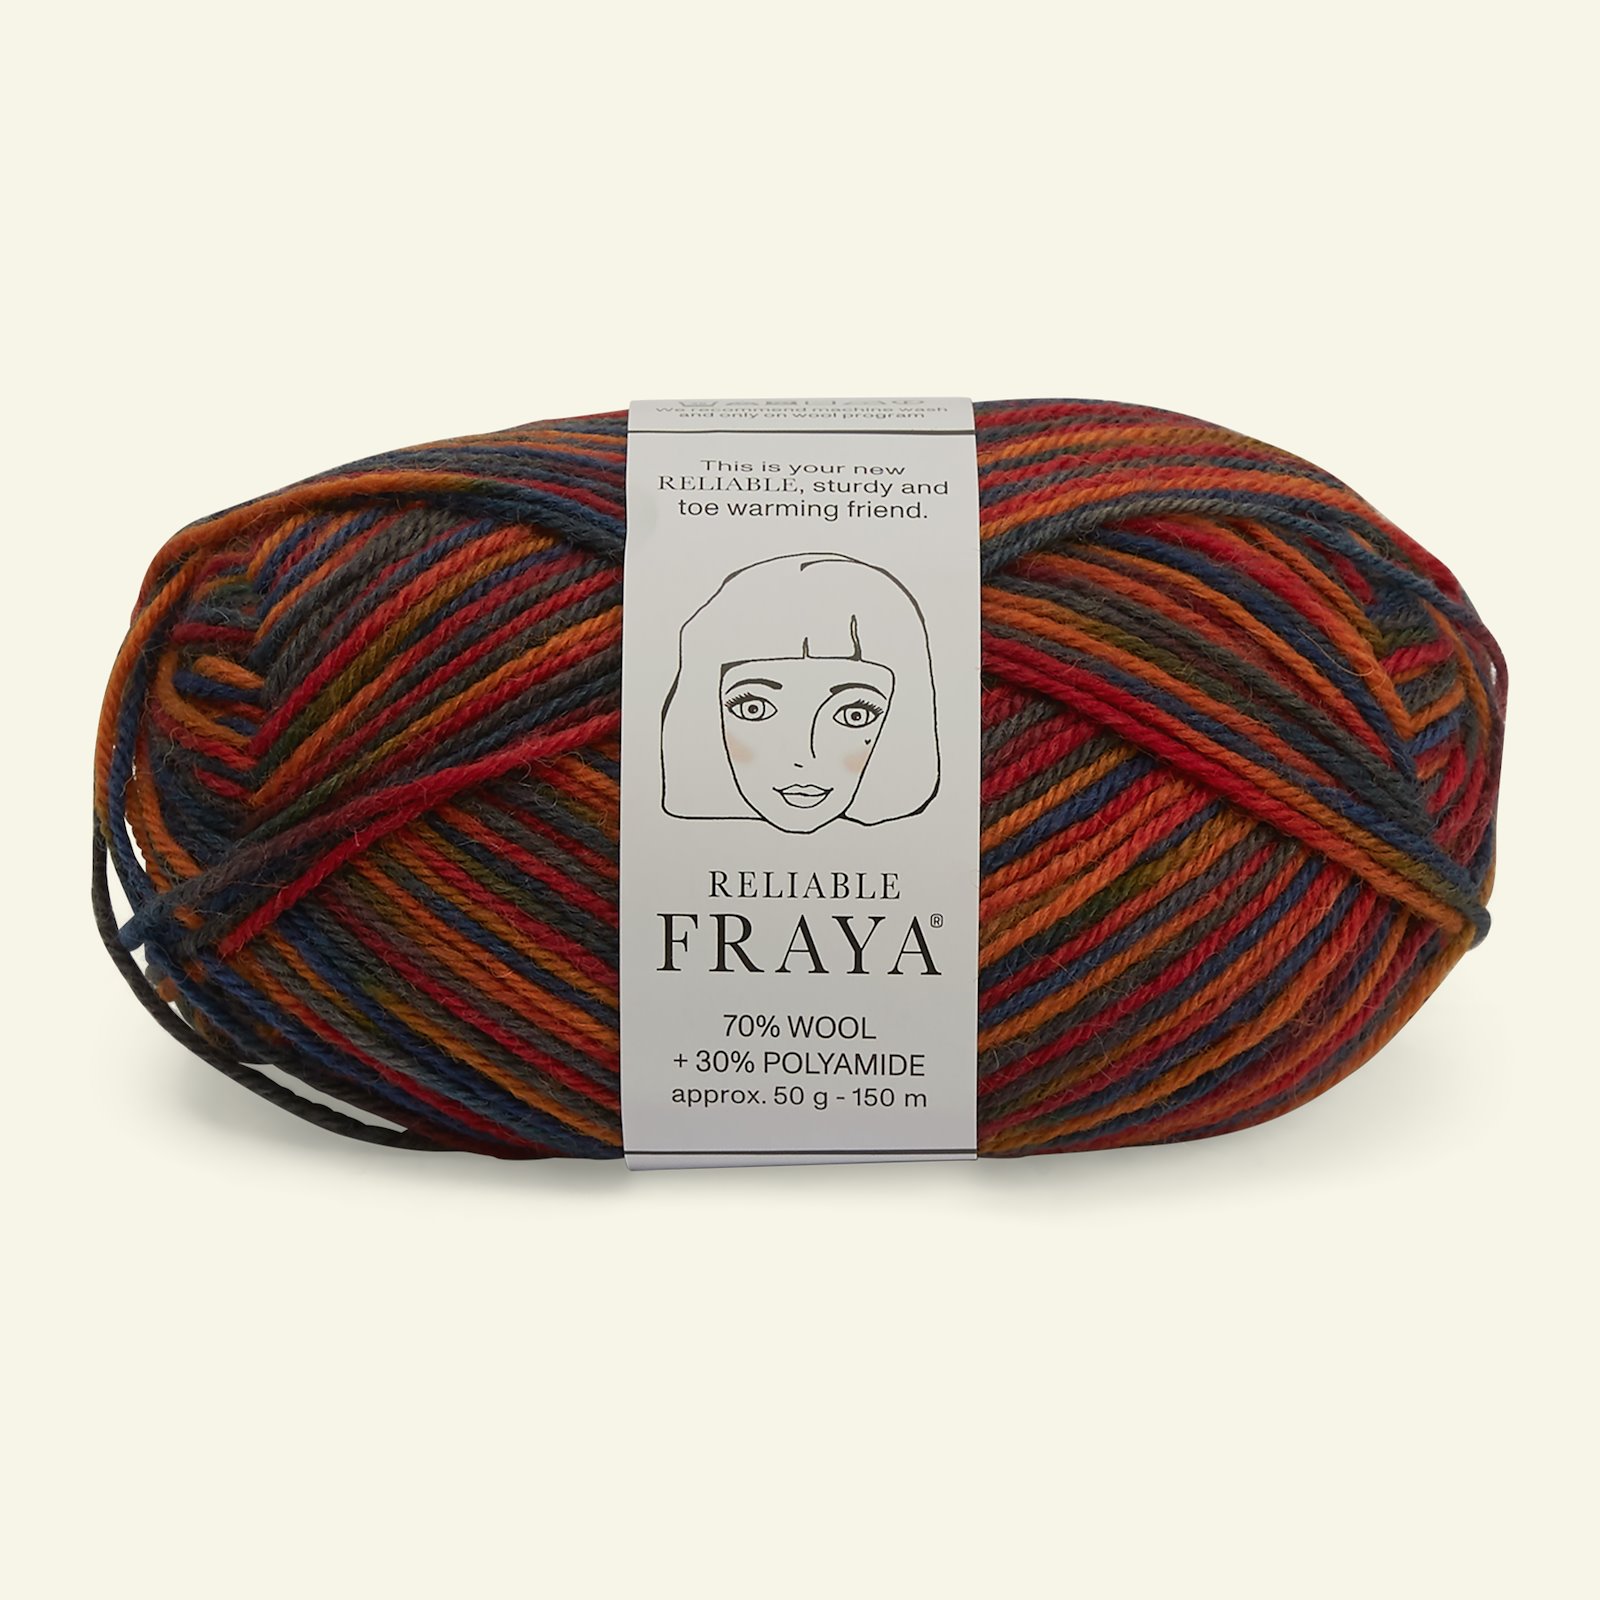 FRAYA, wool yarn "Reliable", red/petrol mix col. 90001200_pack